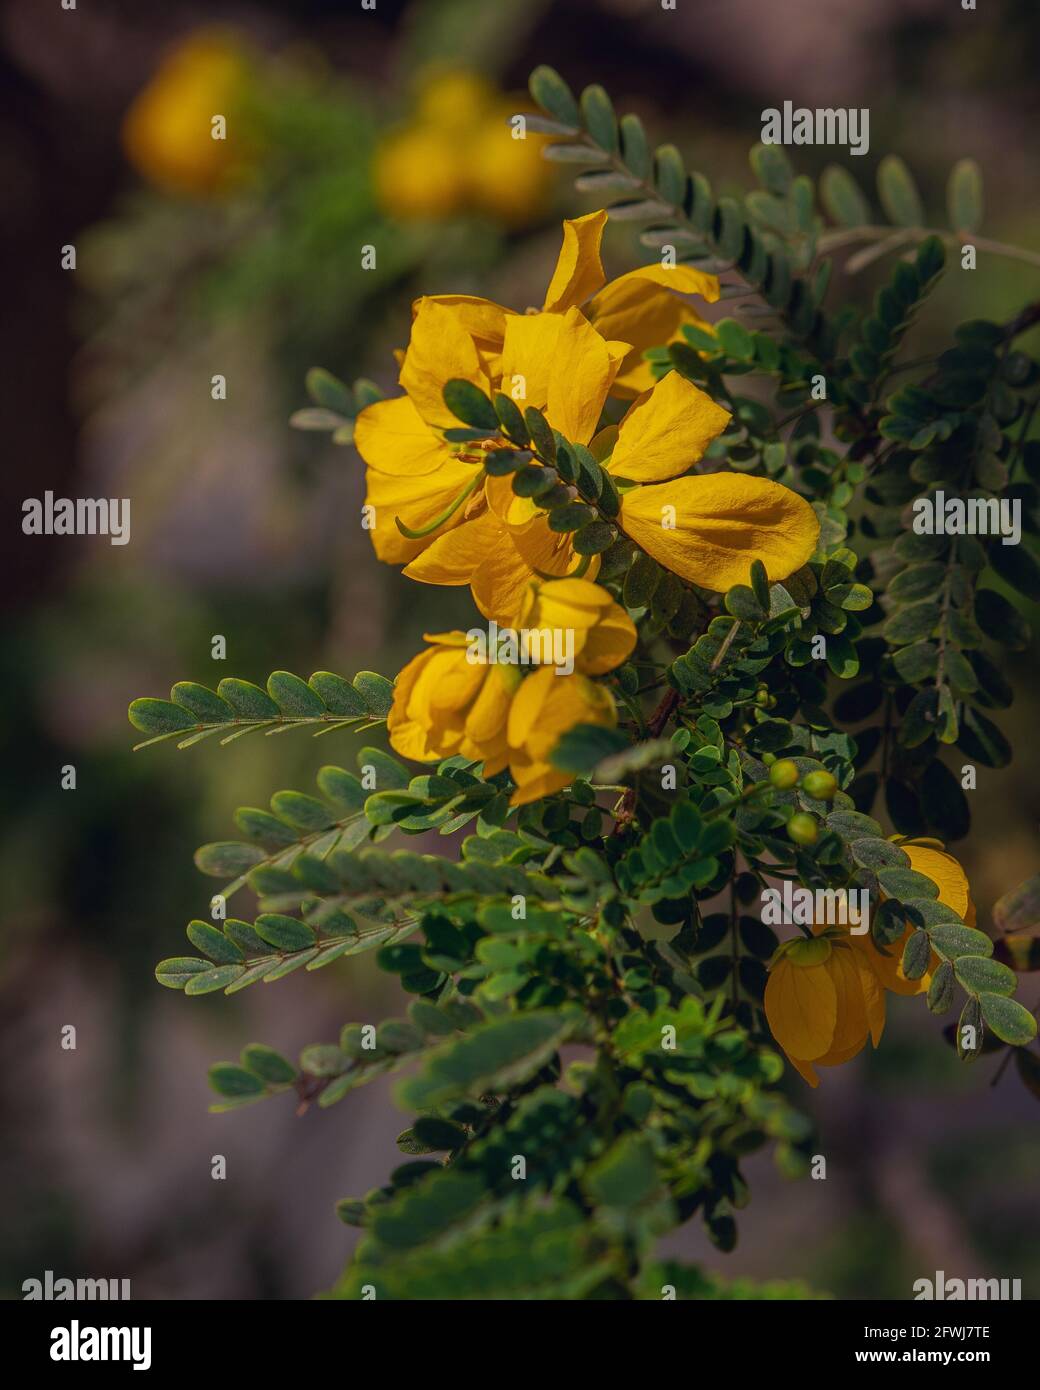 Yellow Cassia siamea or Senna siamea flowers in a tree with green leaves and blurry background Stock Photo